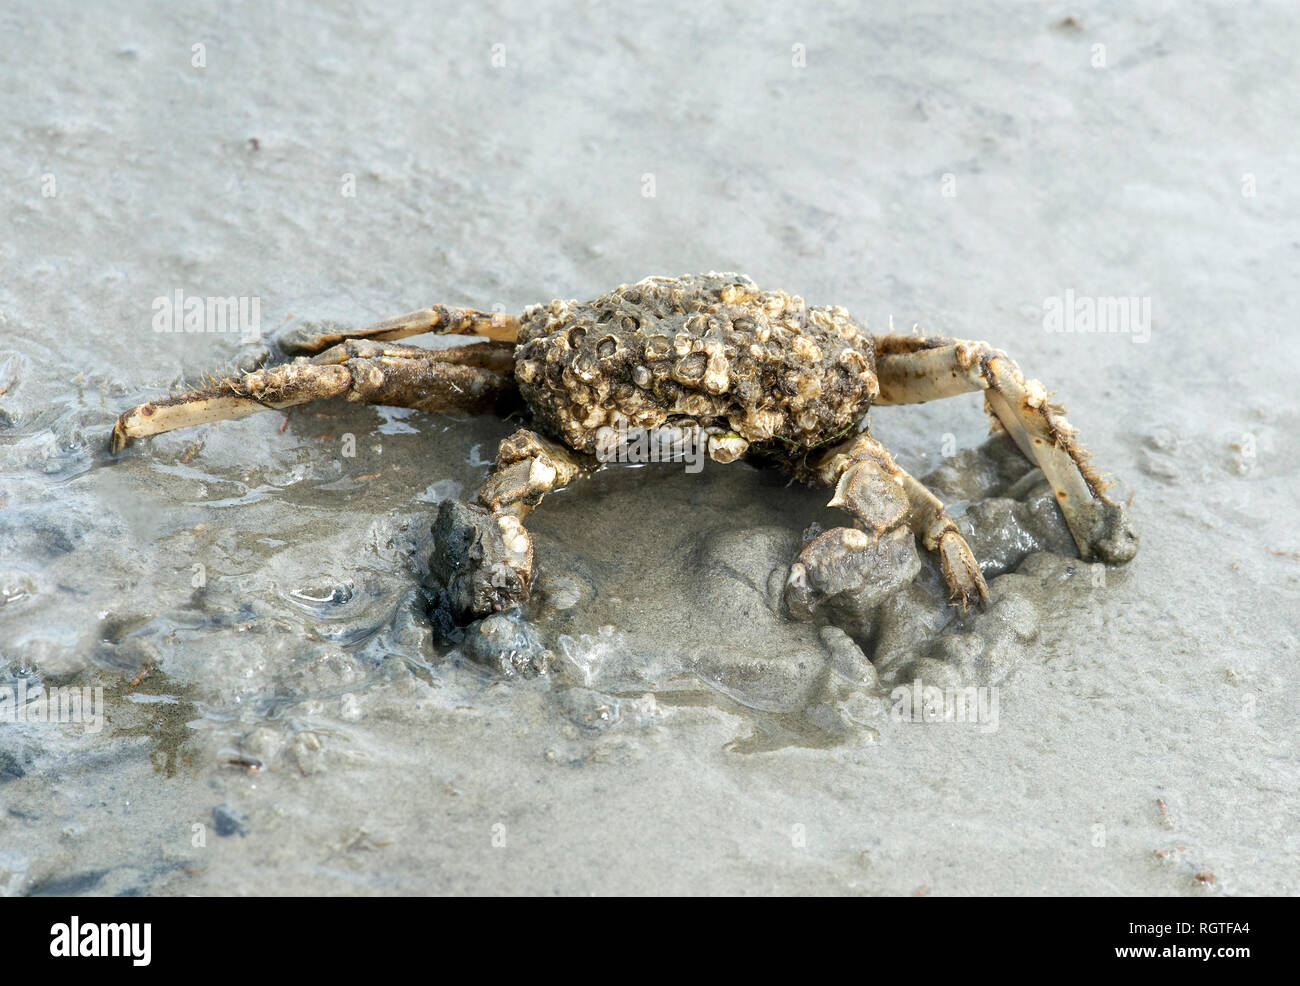 Common shore crab (Carcinus maenas) starting to bury itself into the sand, Wadden Sea, Schleswig-Holstein, Germany Stock Photo